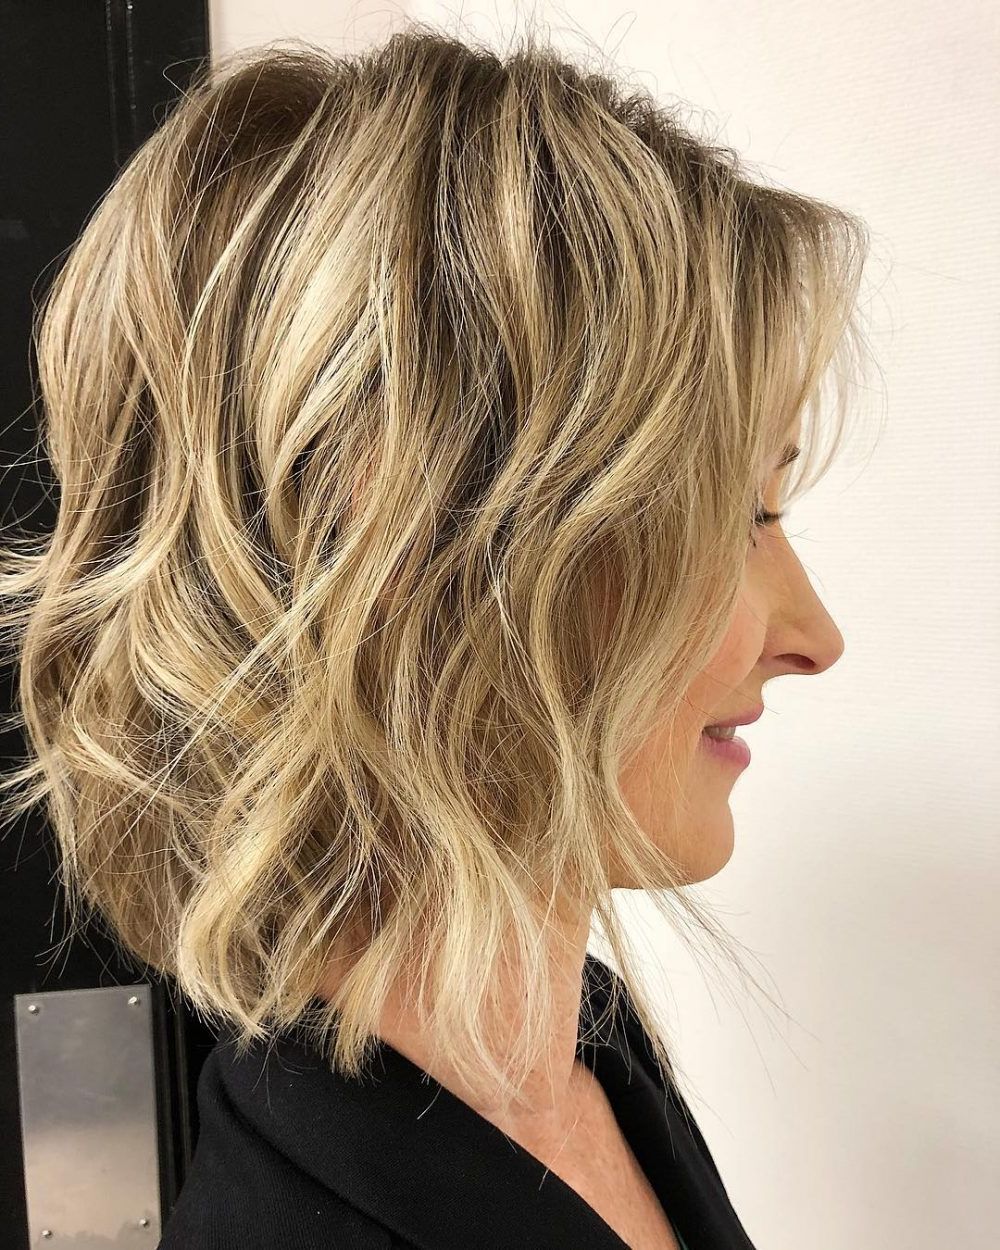 43 Perfect Short Hairstyles For Fine Hair In 2018 With Regard To Nape Length Brown Bob Hairstyles With Messy Curls (View 13 of 25)